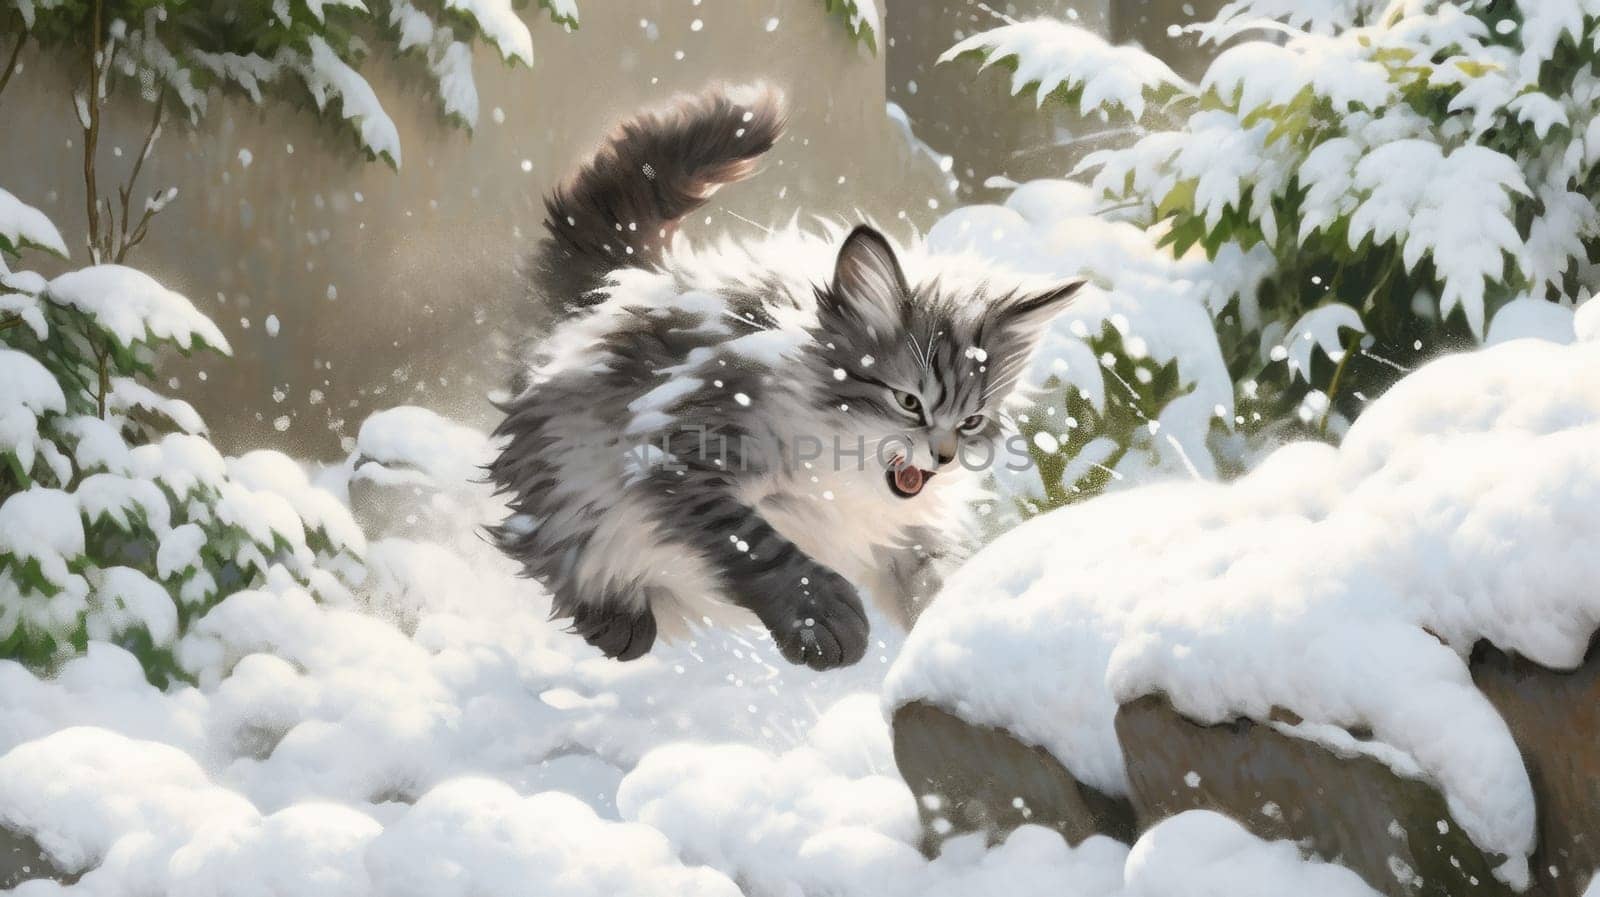 A painting of a cat running through the snow in front of trees